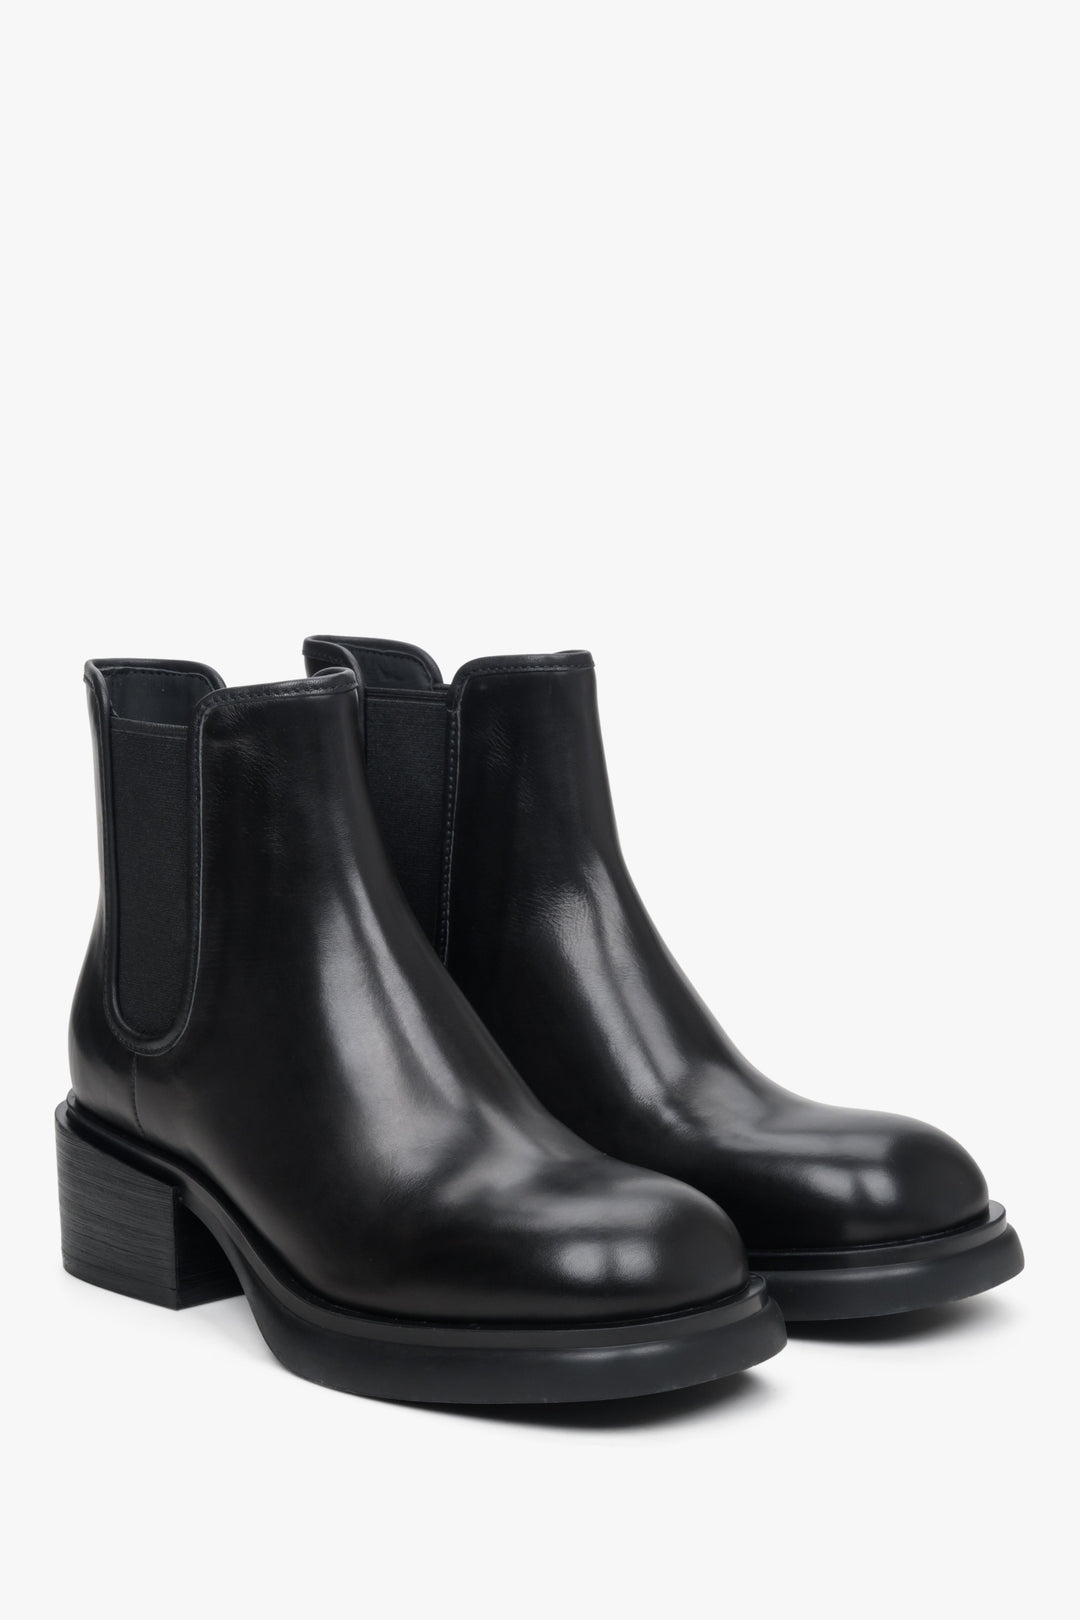 Women's black ankle boots with a block heel.